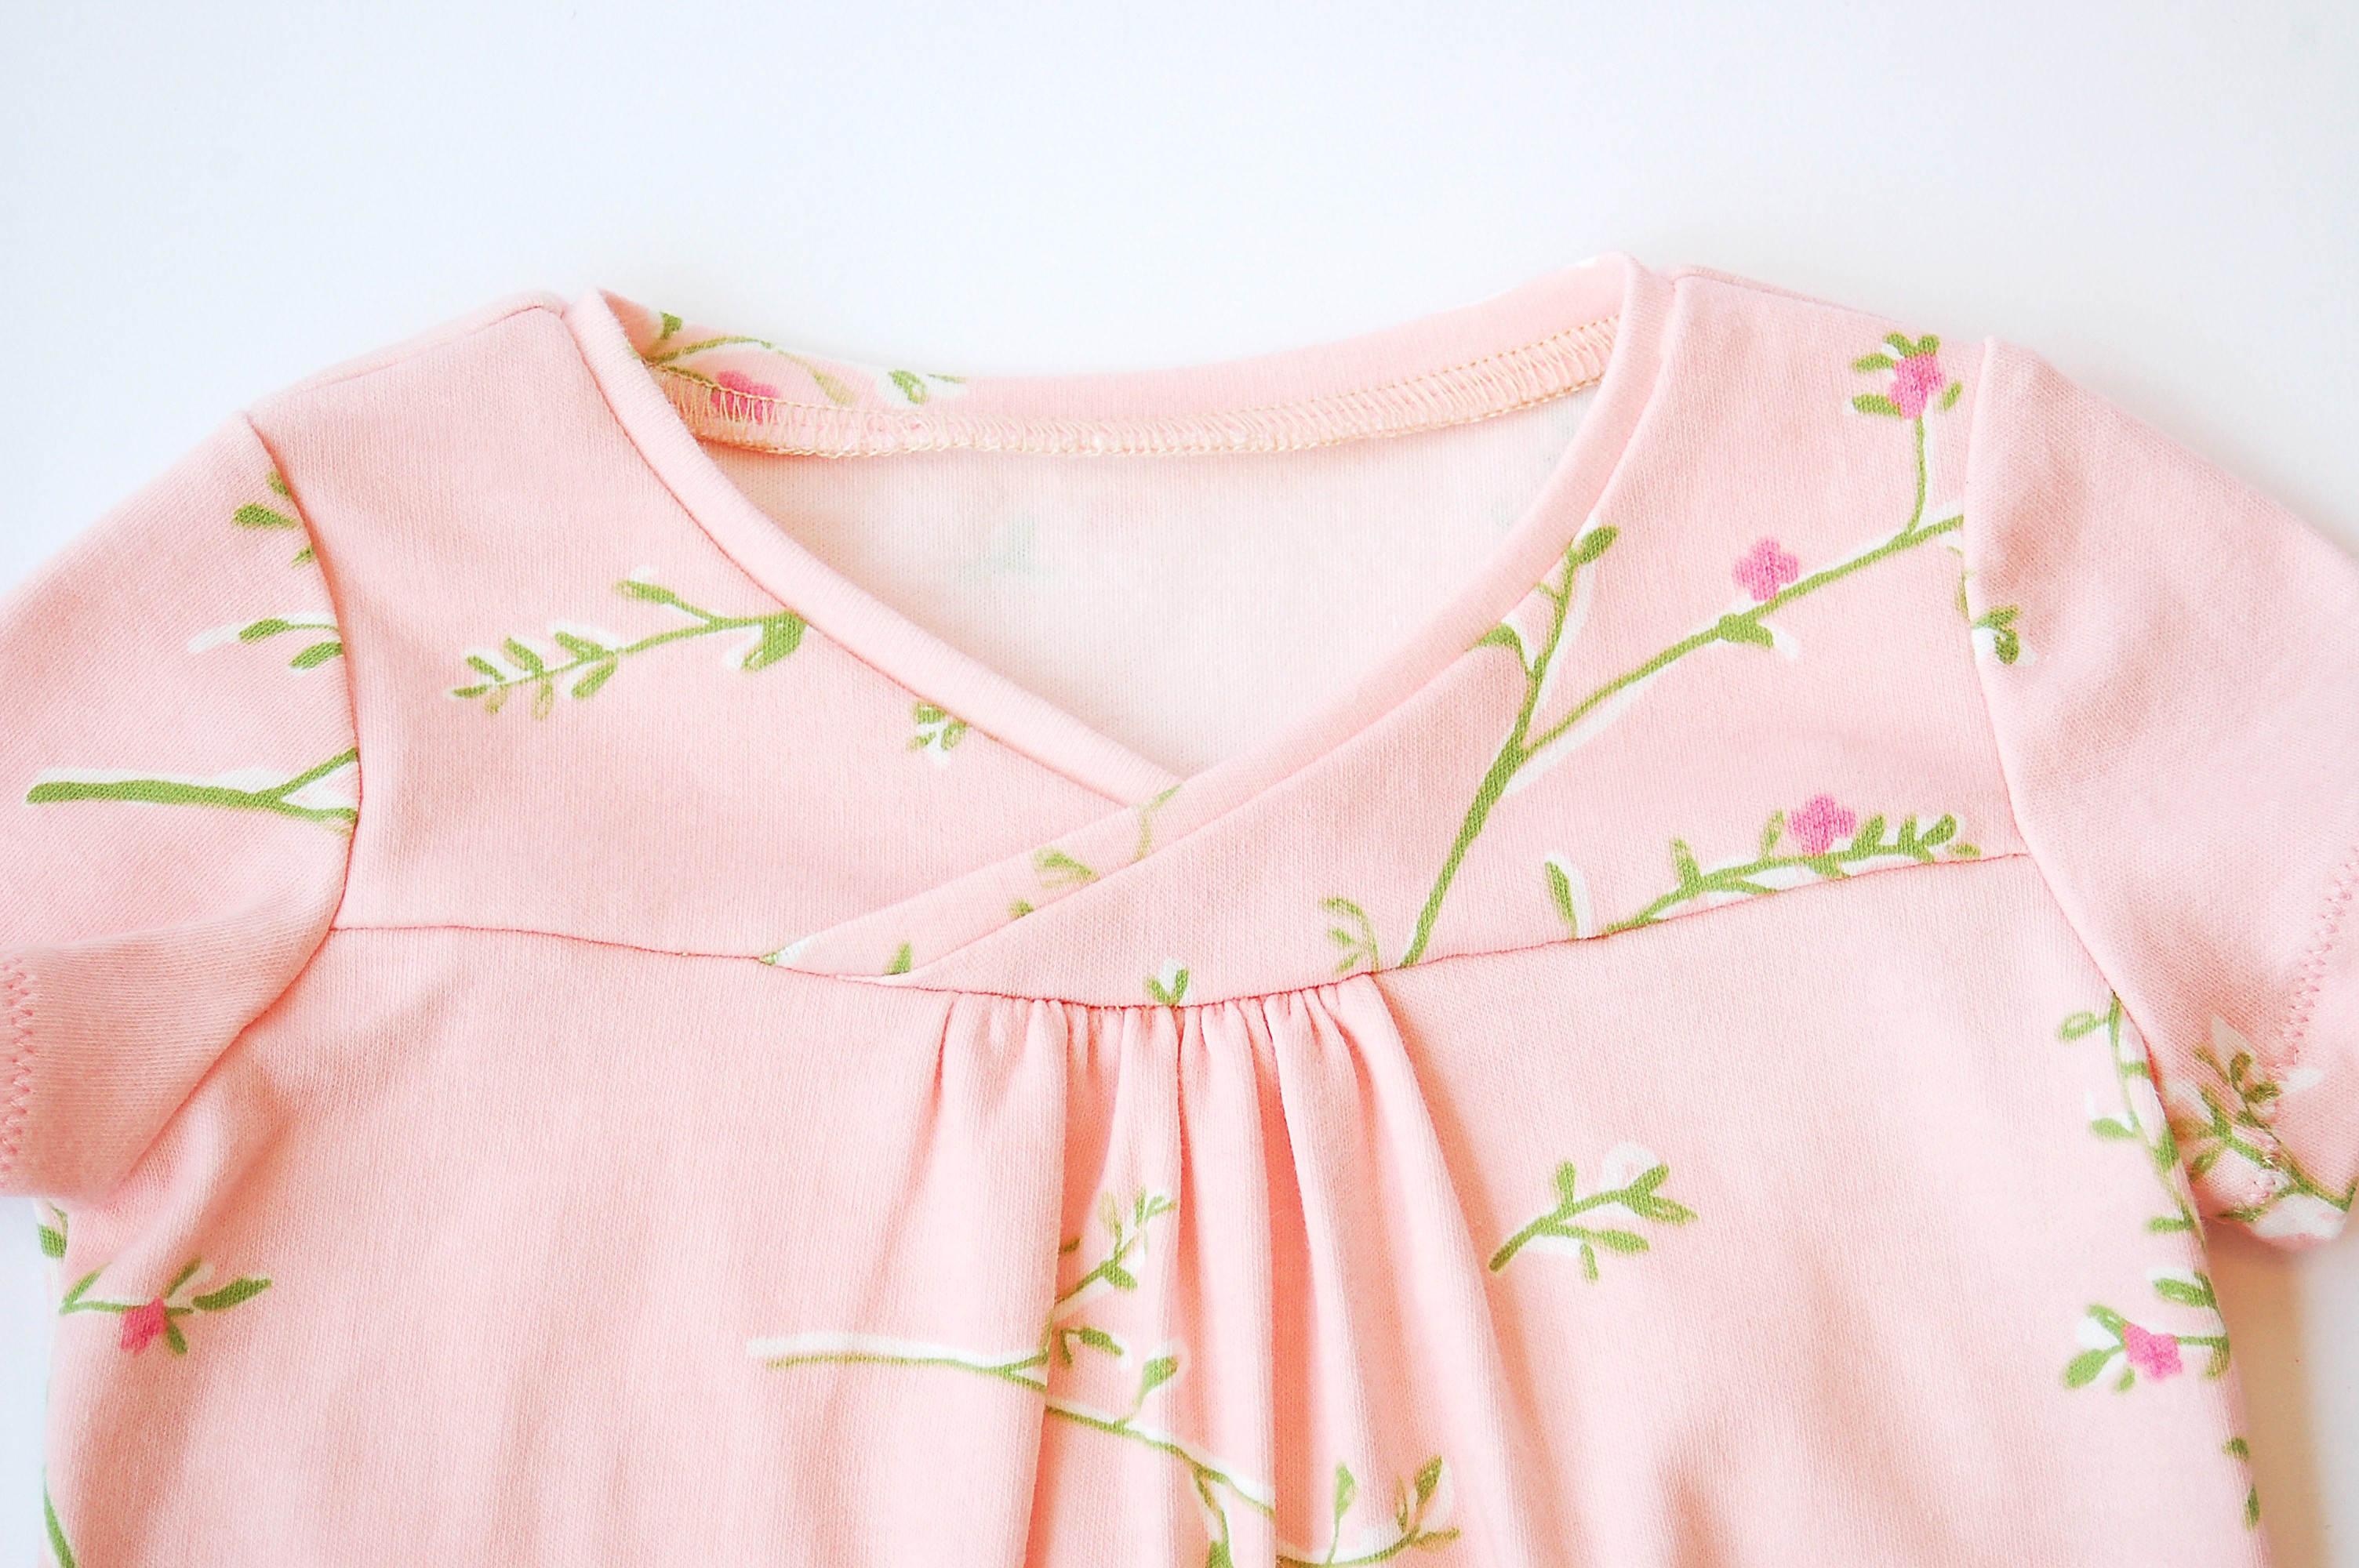 Introducing the Hopscotch Knit Top and Dress Sewing Pattern | Blog ...